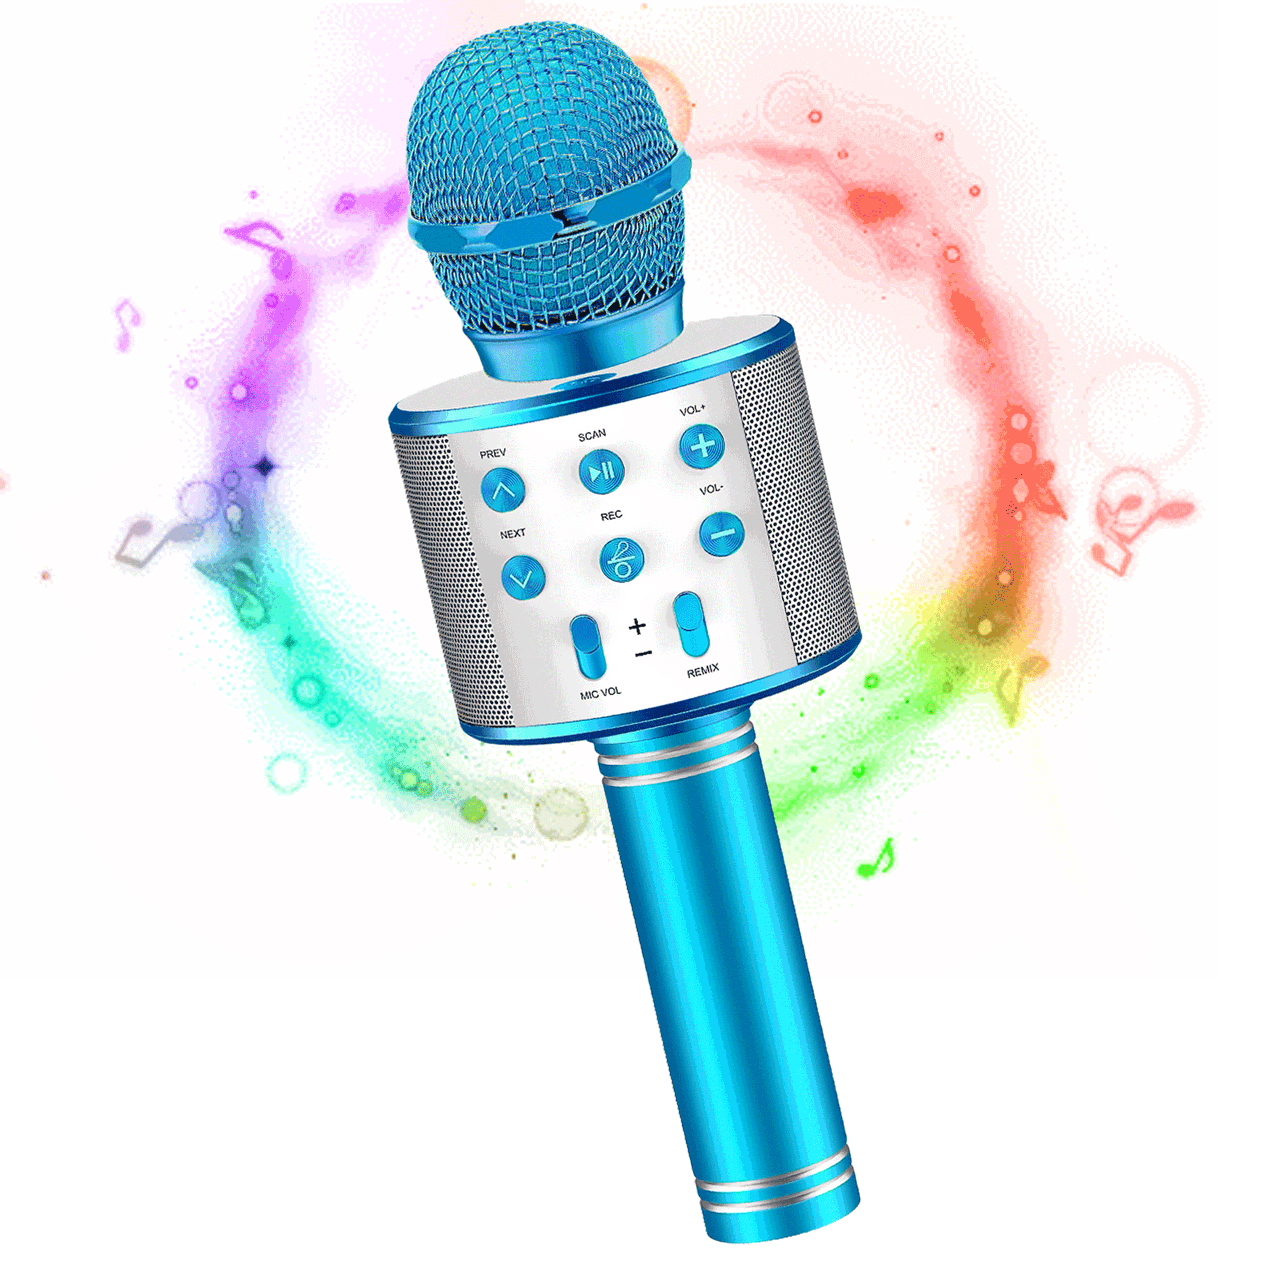 Wireless Bluetooth Karaoke Microphone, 4 in 1 Handheld Mic Speaker Machine  Kid Adult Fit for Android/iPhone/iPad/PC, Gift for 3 4 5 6 7 8 Years Old  Boy Girl - Walmart.com